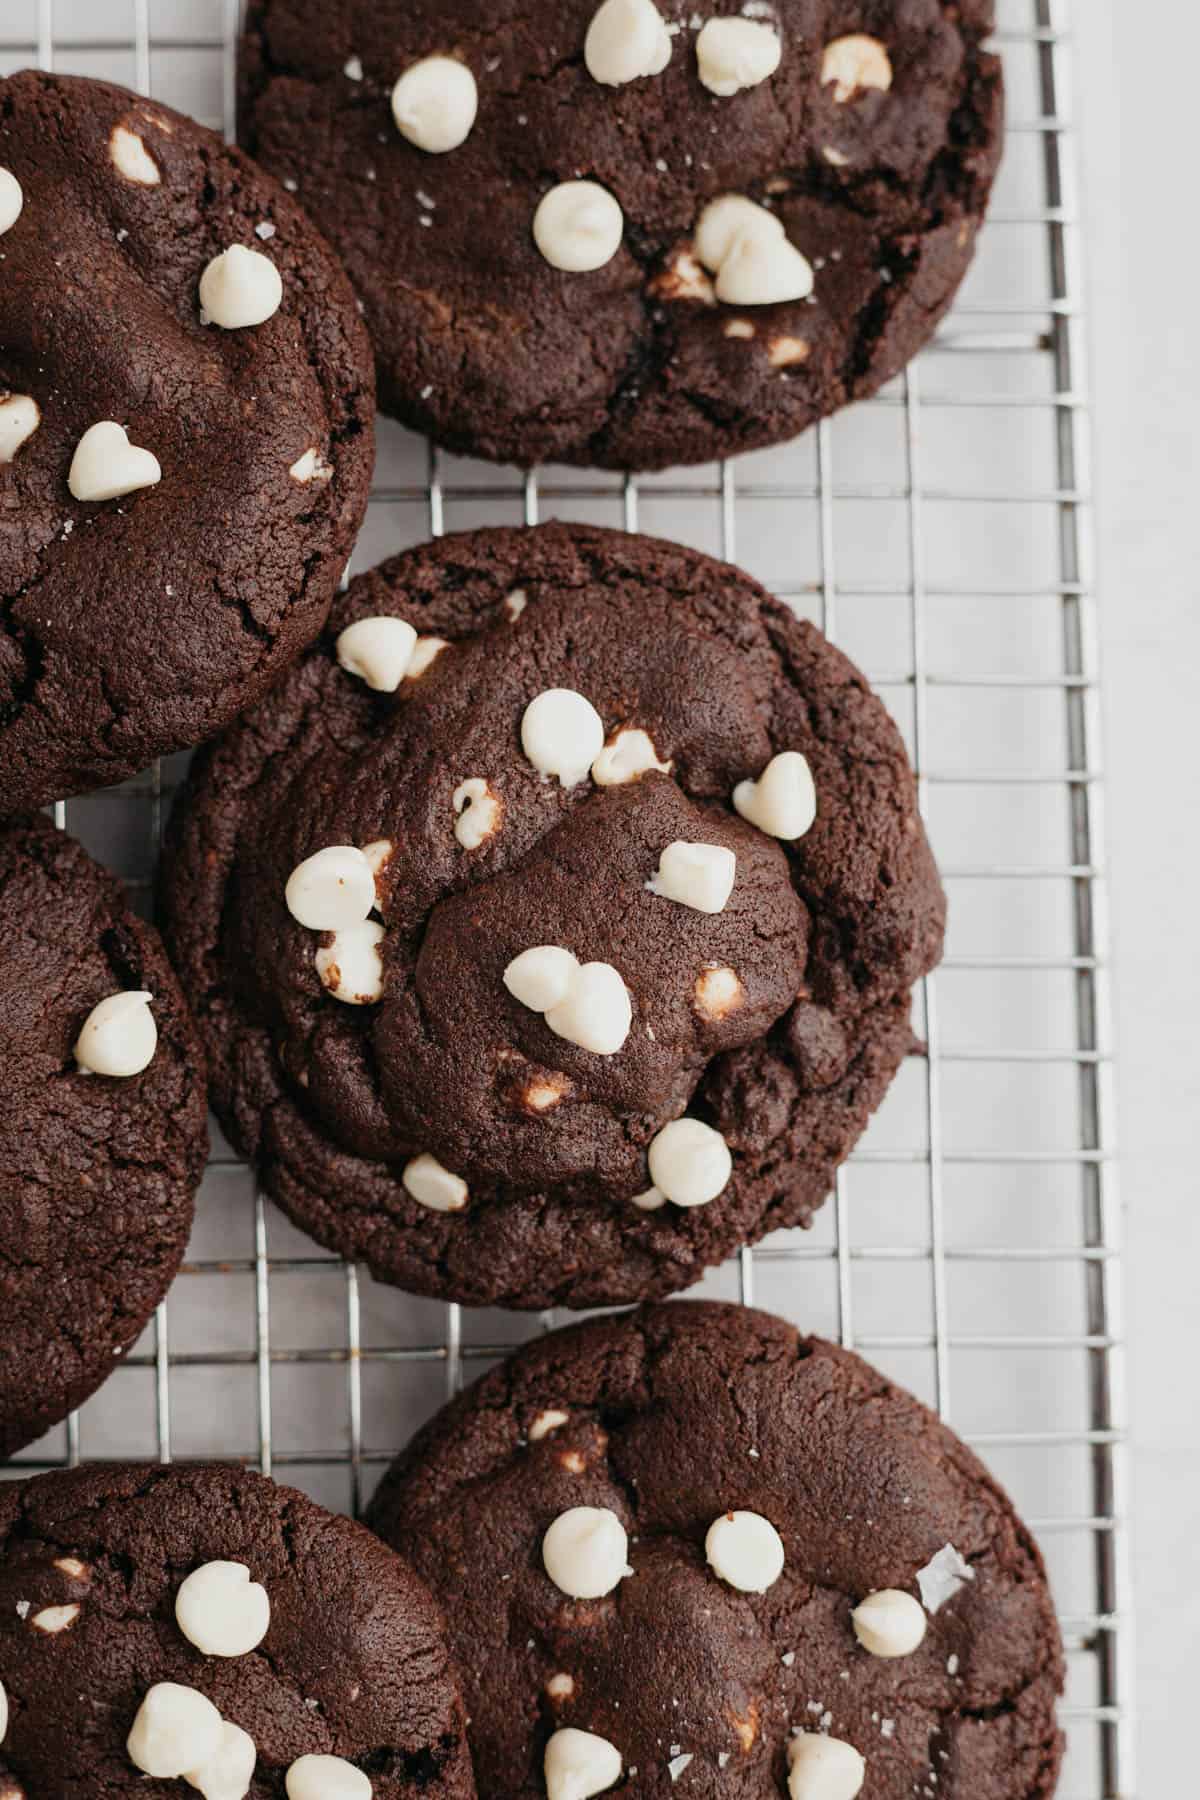 Chocolate cookies with white chocolate chips on a silver cooling rack.